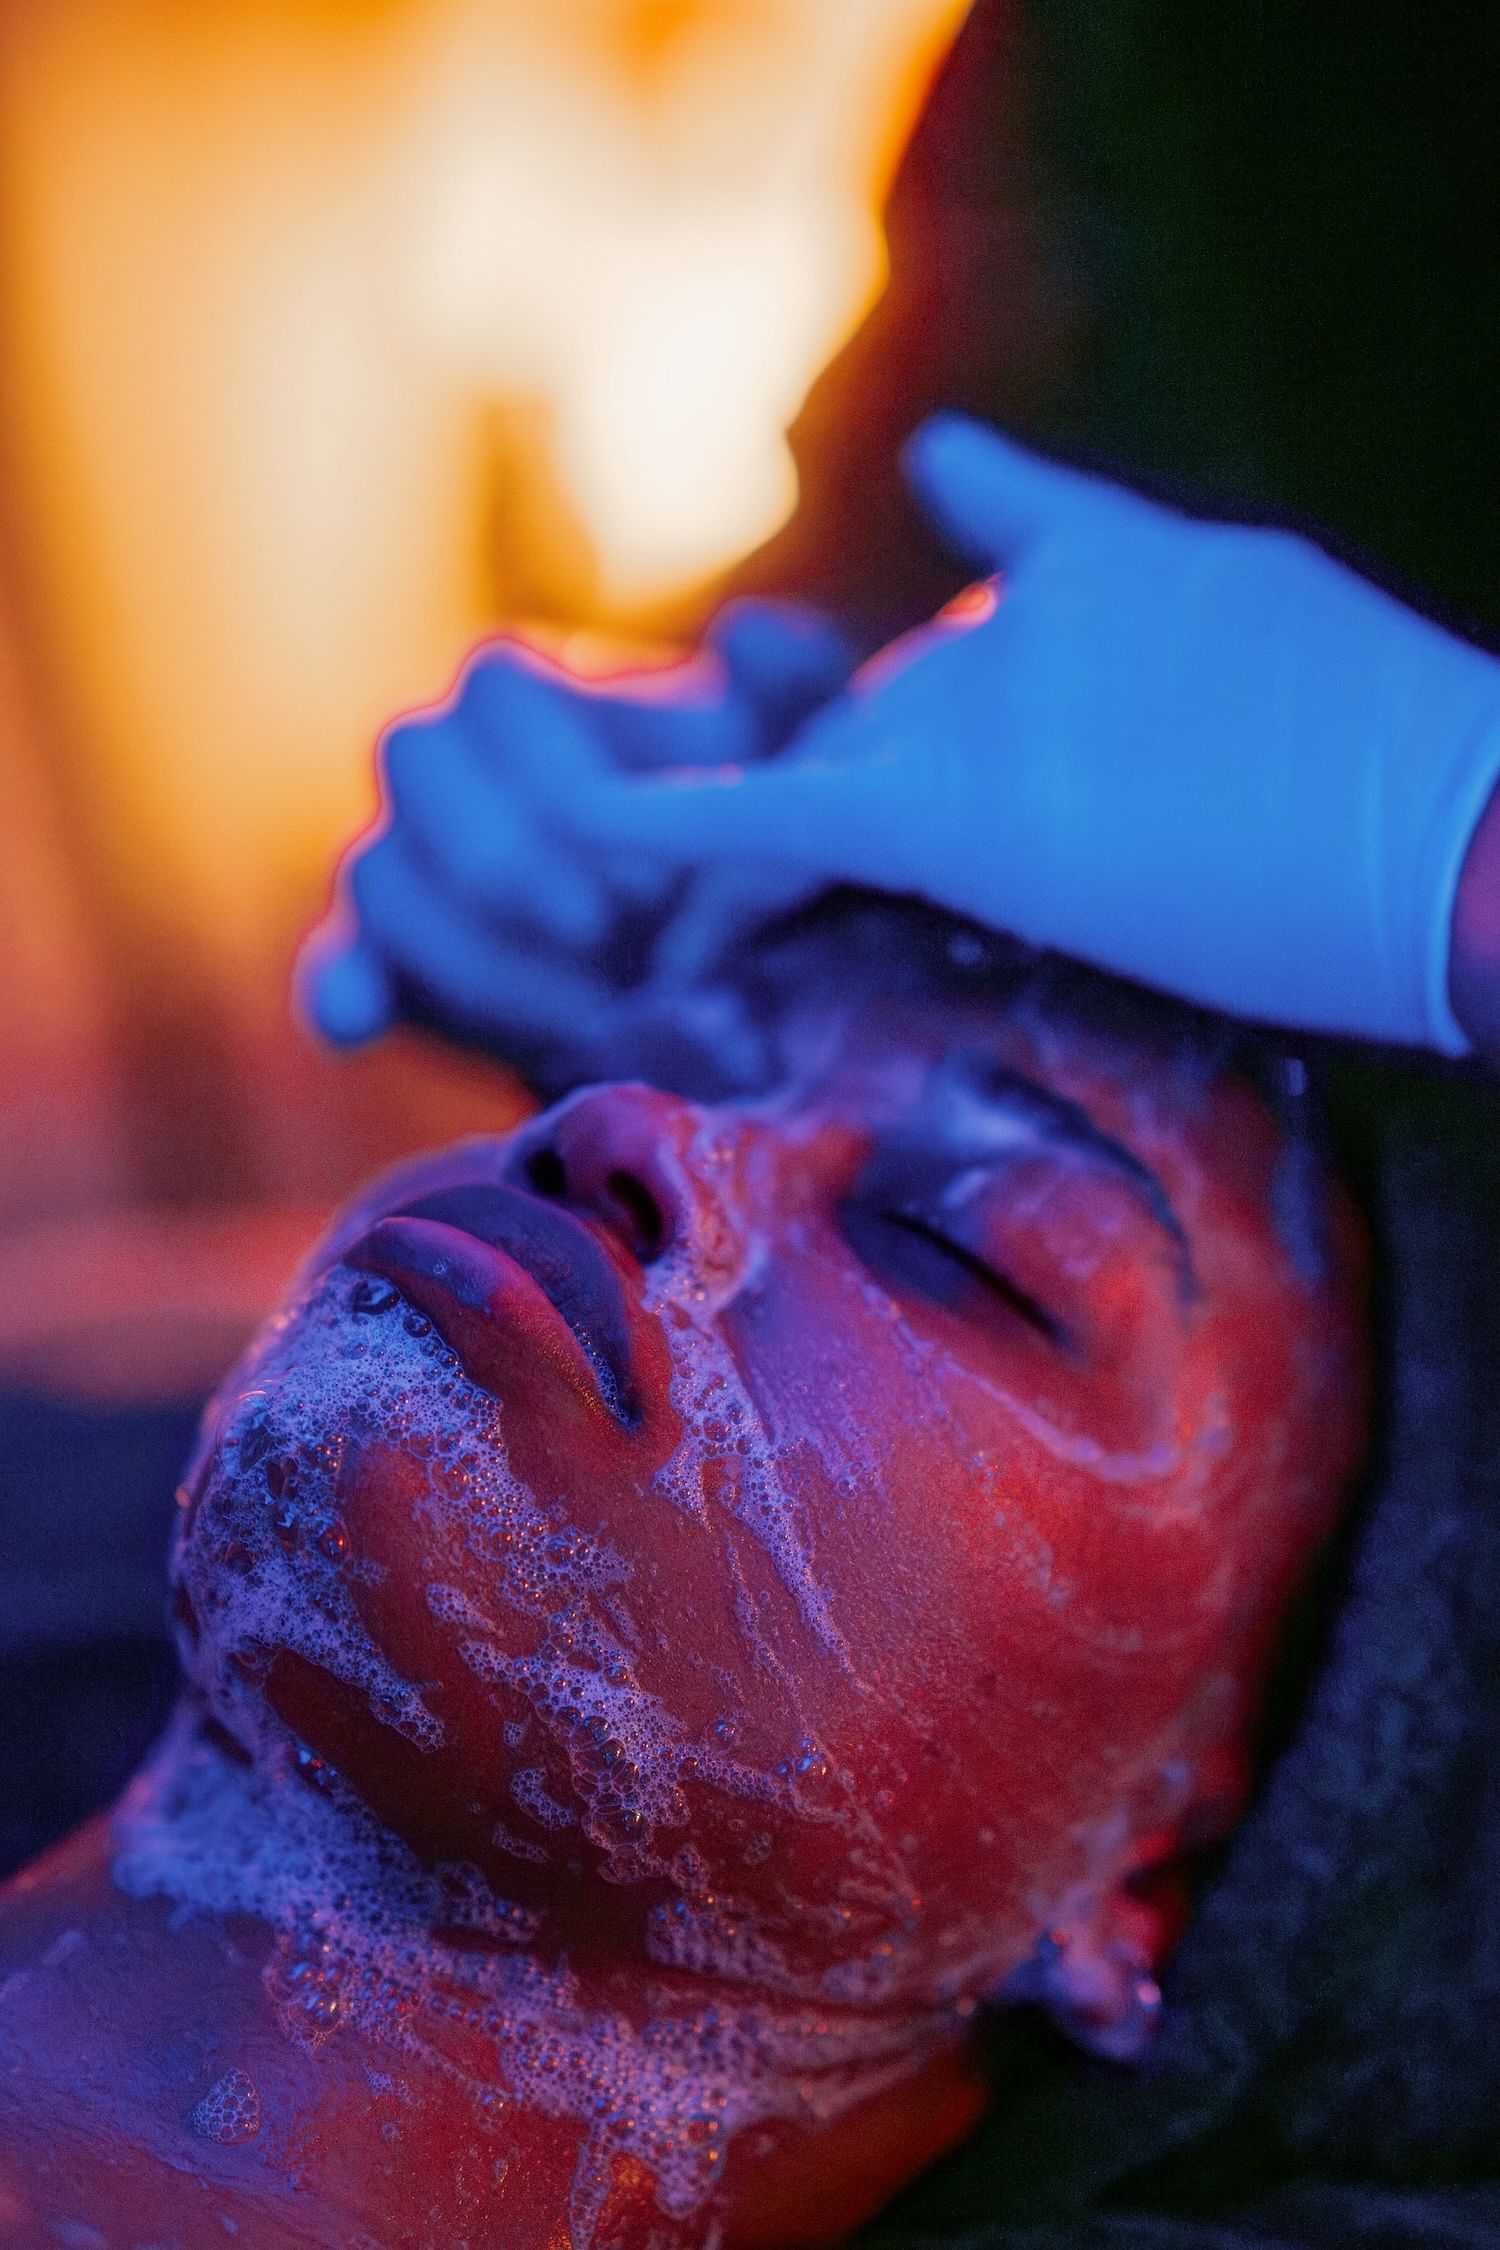 Person receiving a facial treatment under colorful lighting.